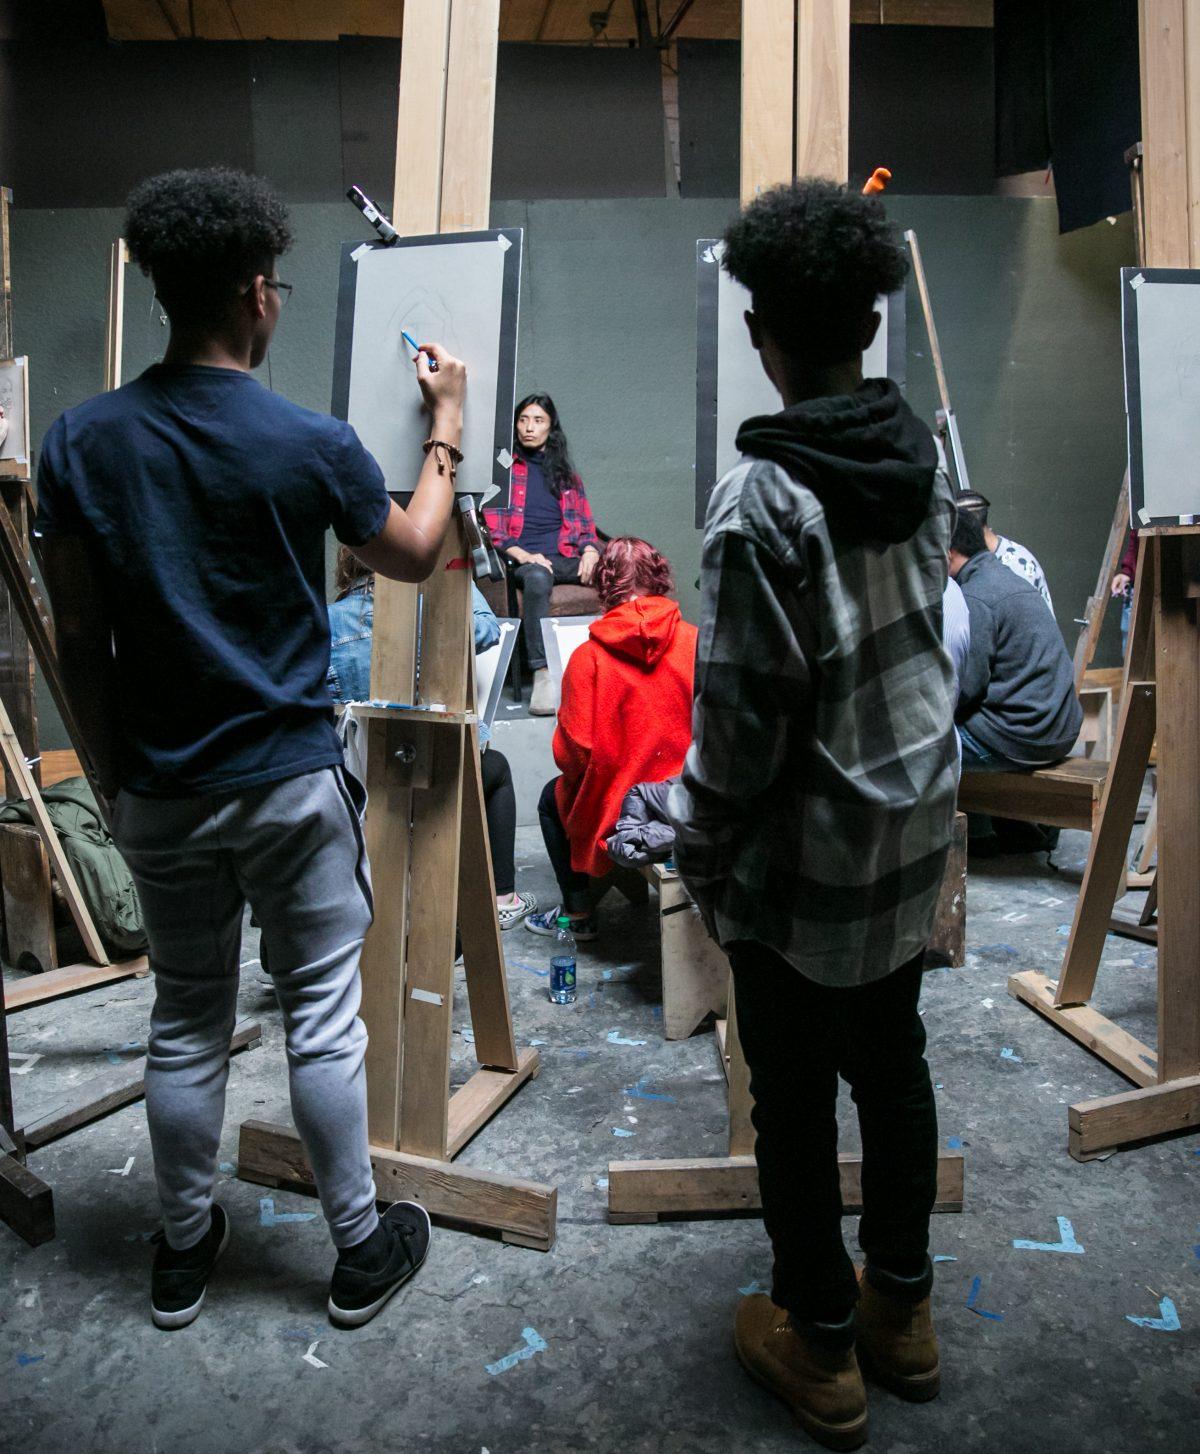 High school students from BAVPA take a workshop given by Edward Minoff at Grand Central Atelier on March 9, 2018. (Milene Fernandez/The Epoch Times)